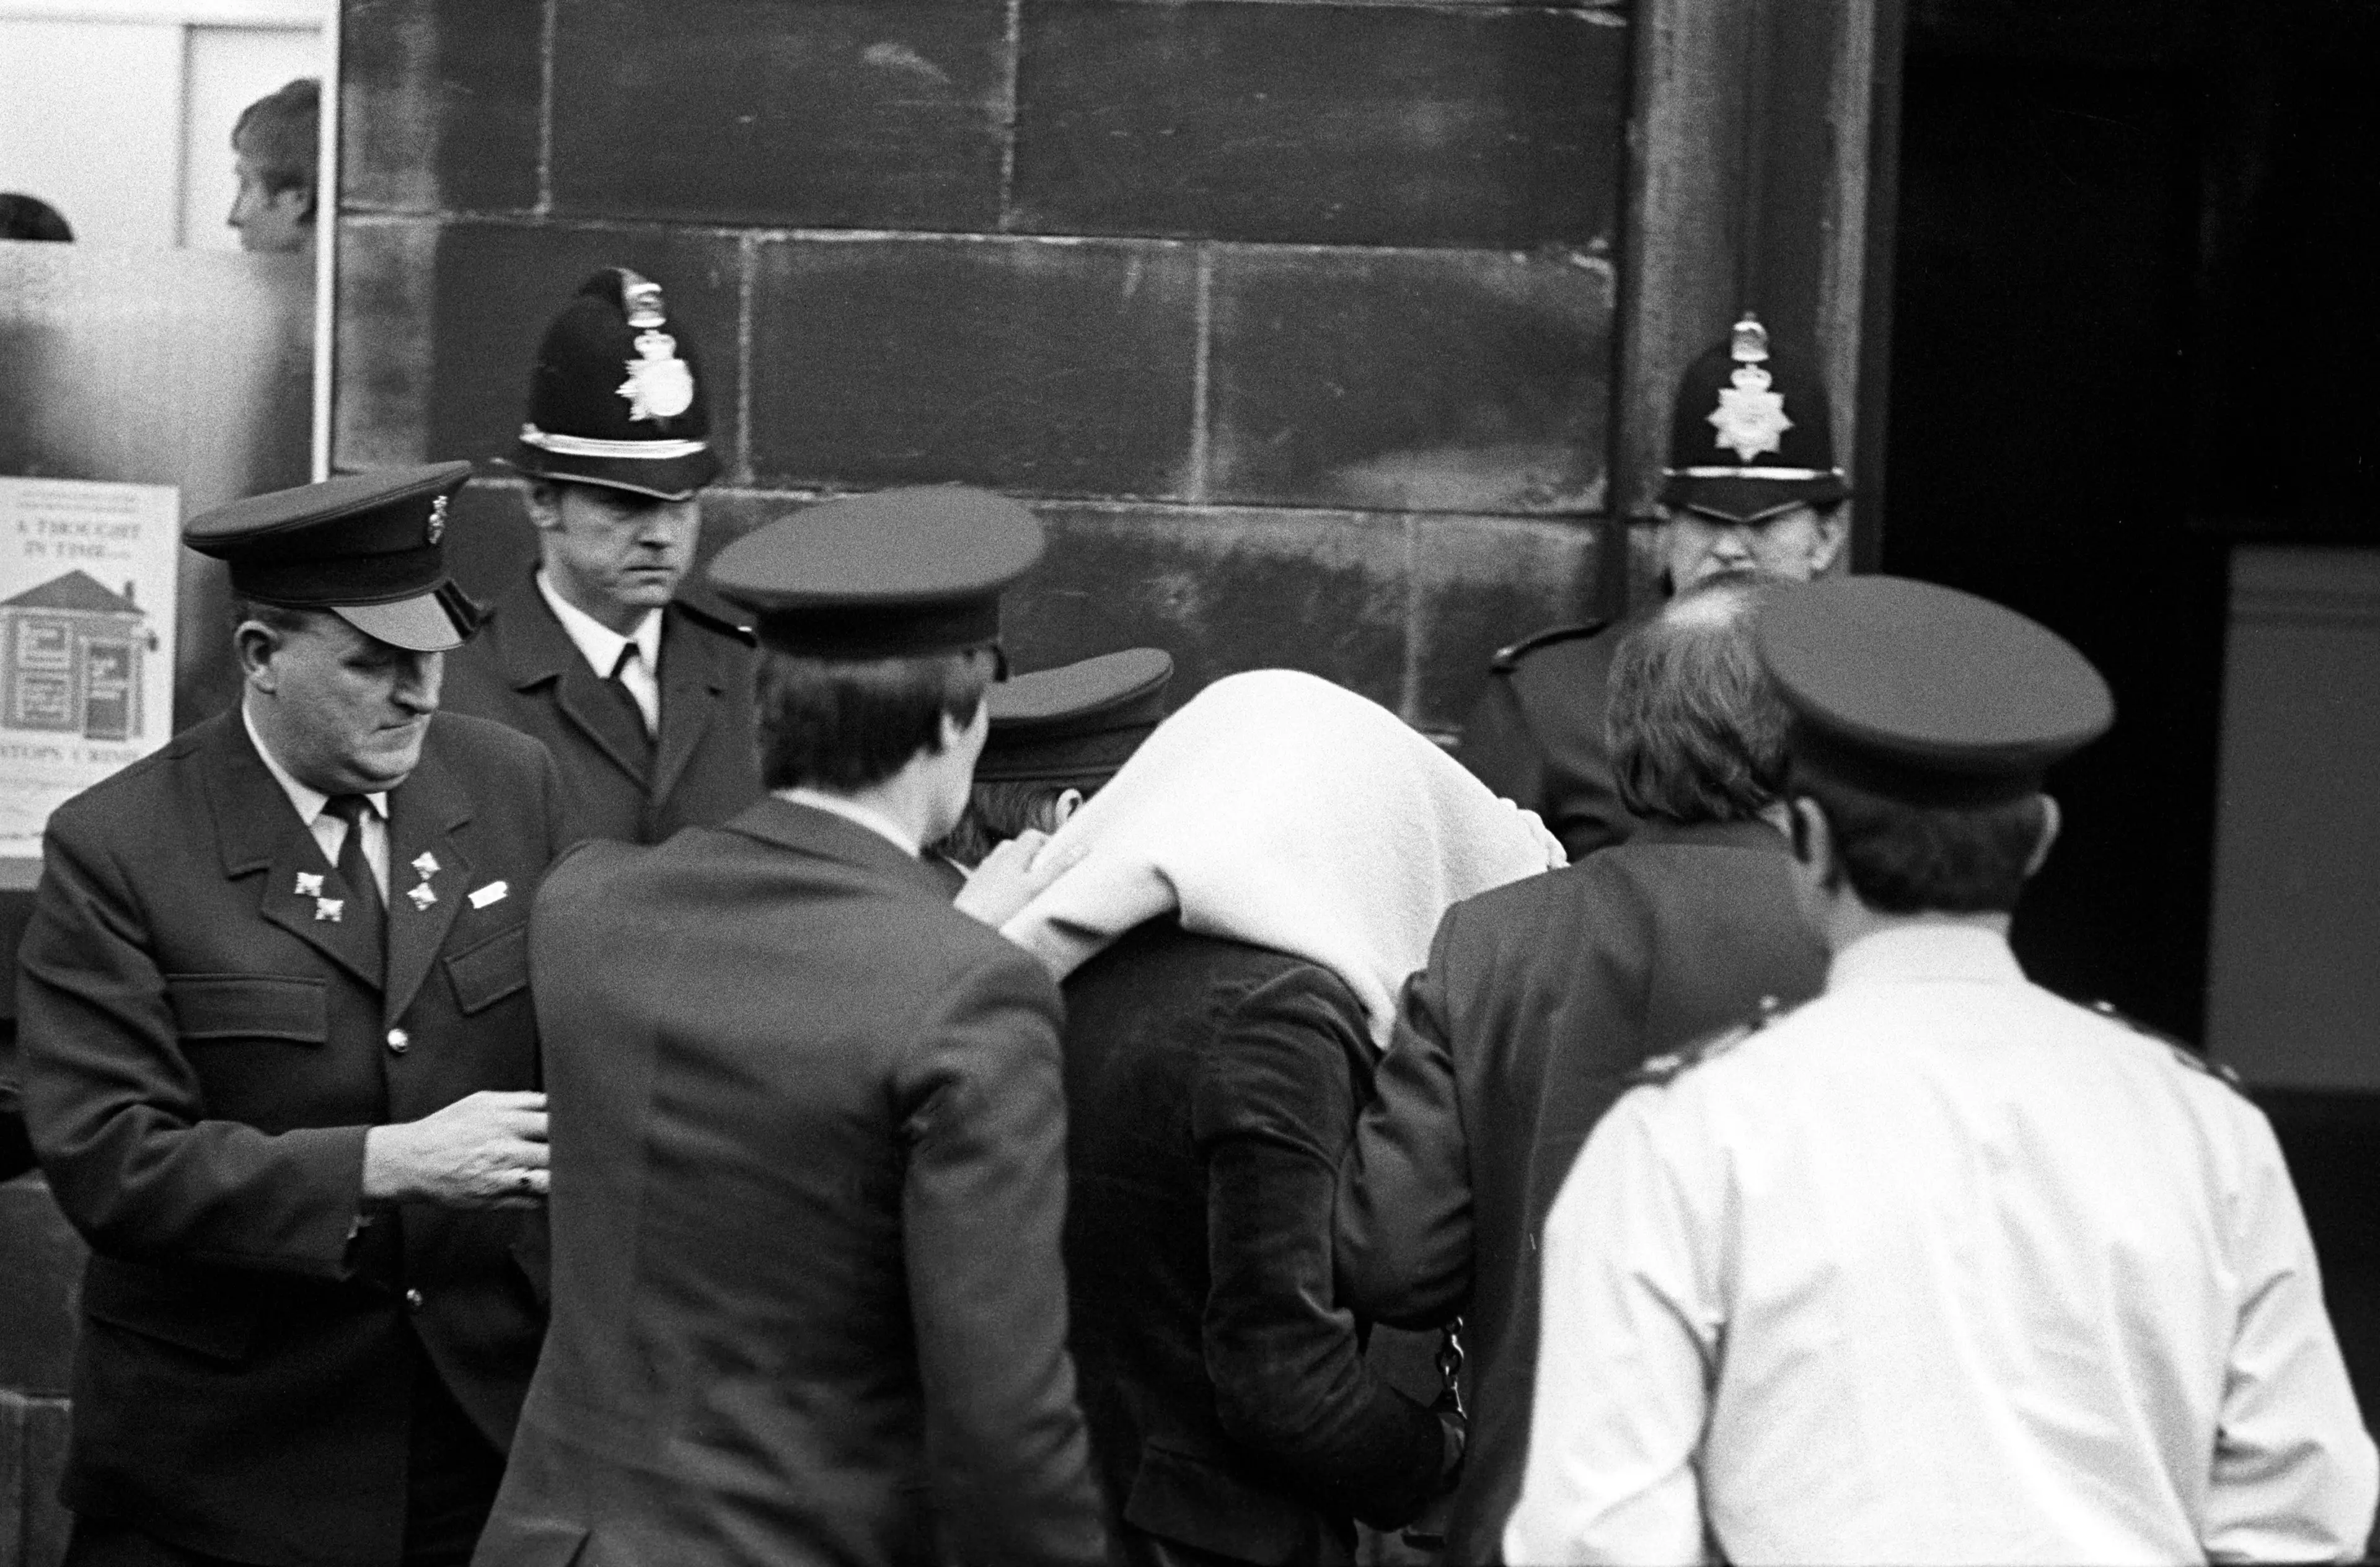 Peter Sutcliffe arriving at Dewsbury Magistrates Court in 1981.